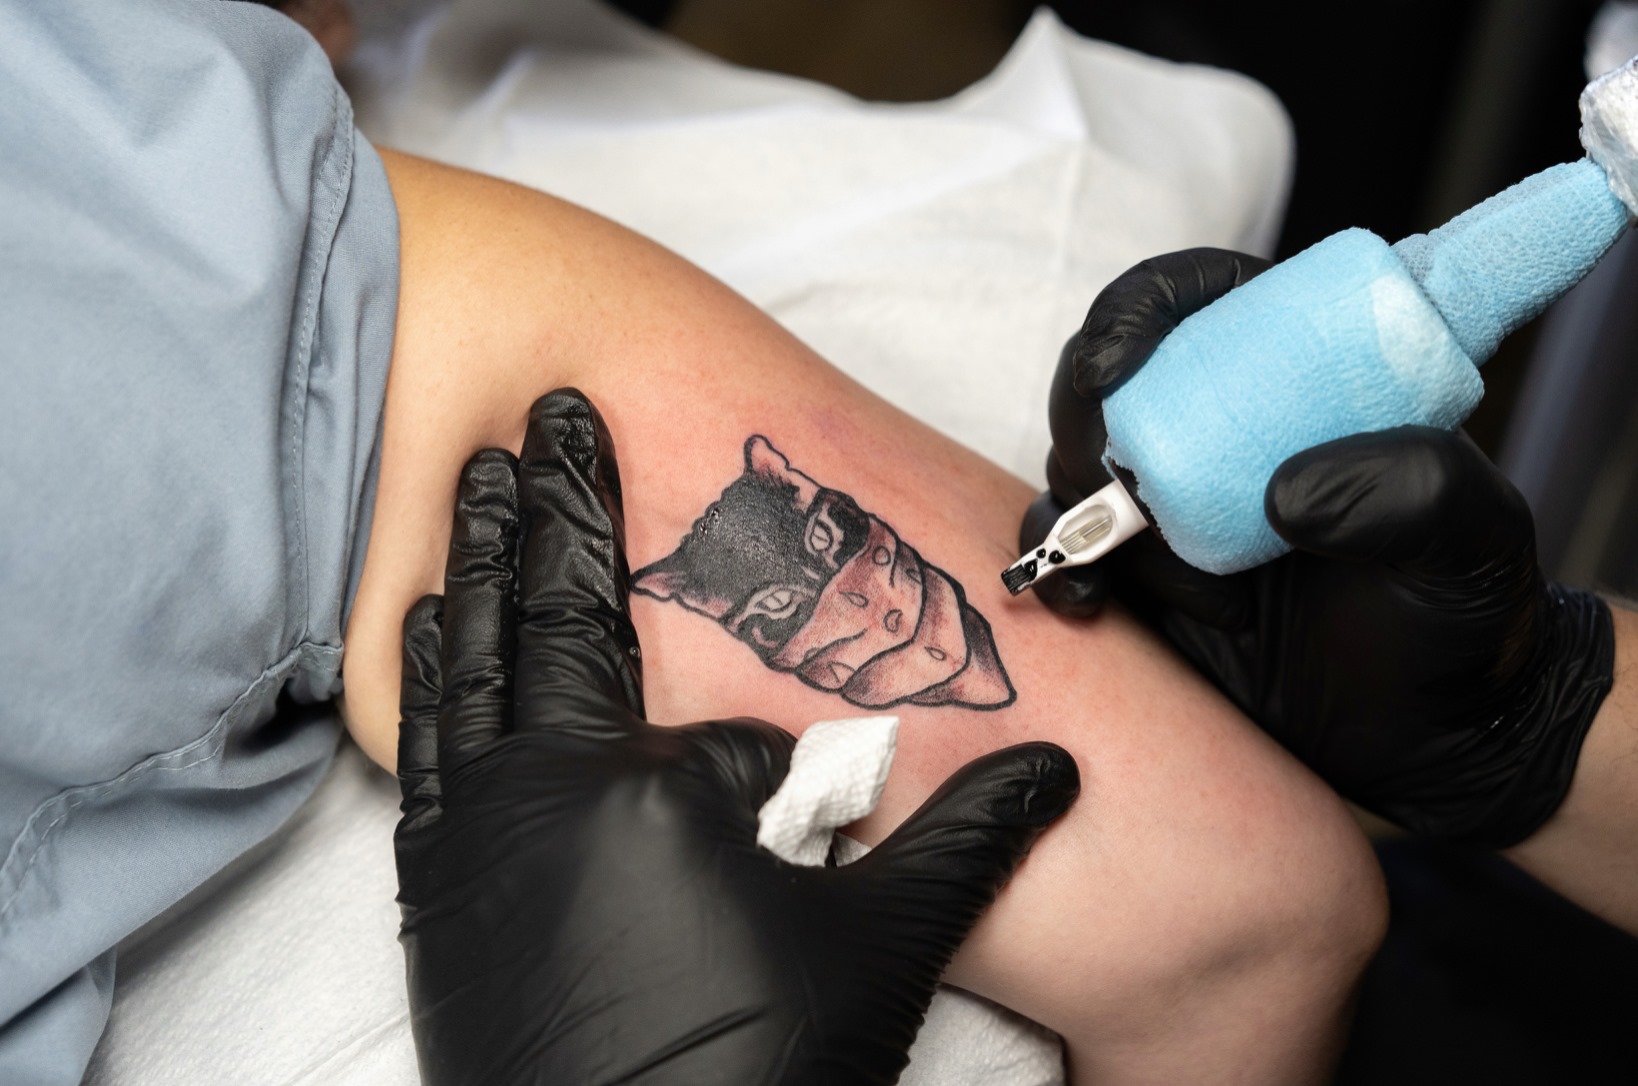 3rd Annual Cattoo Day! Cat and Tattoos! – SOLD OUT